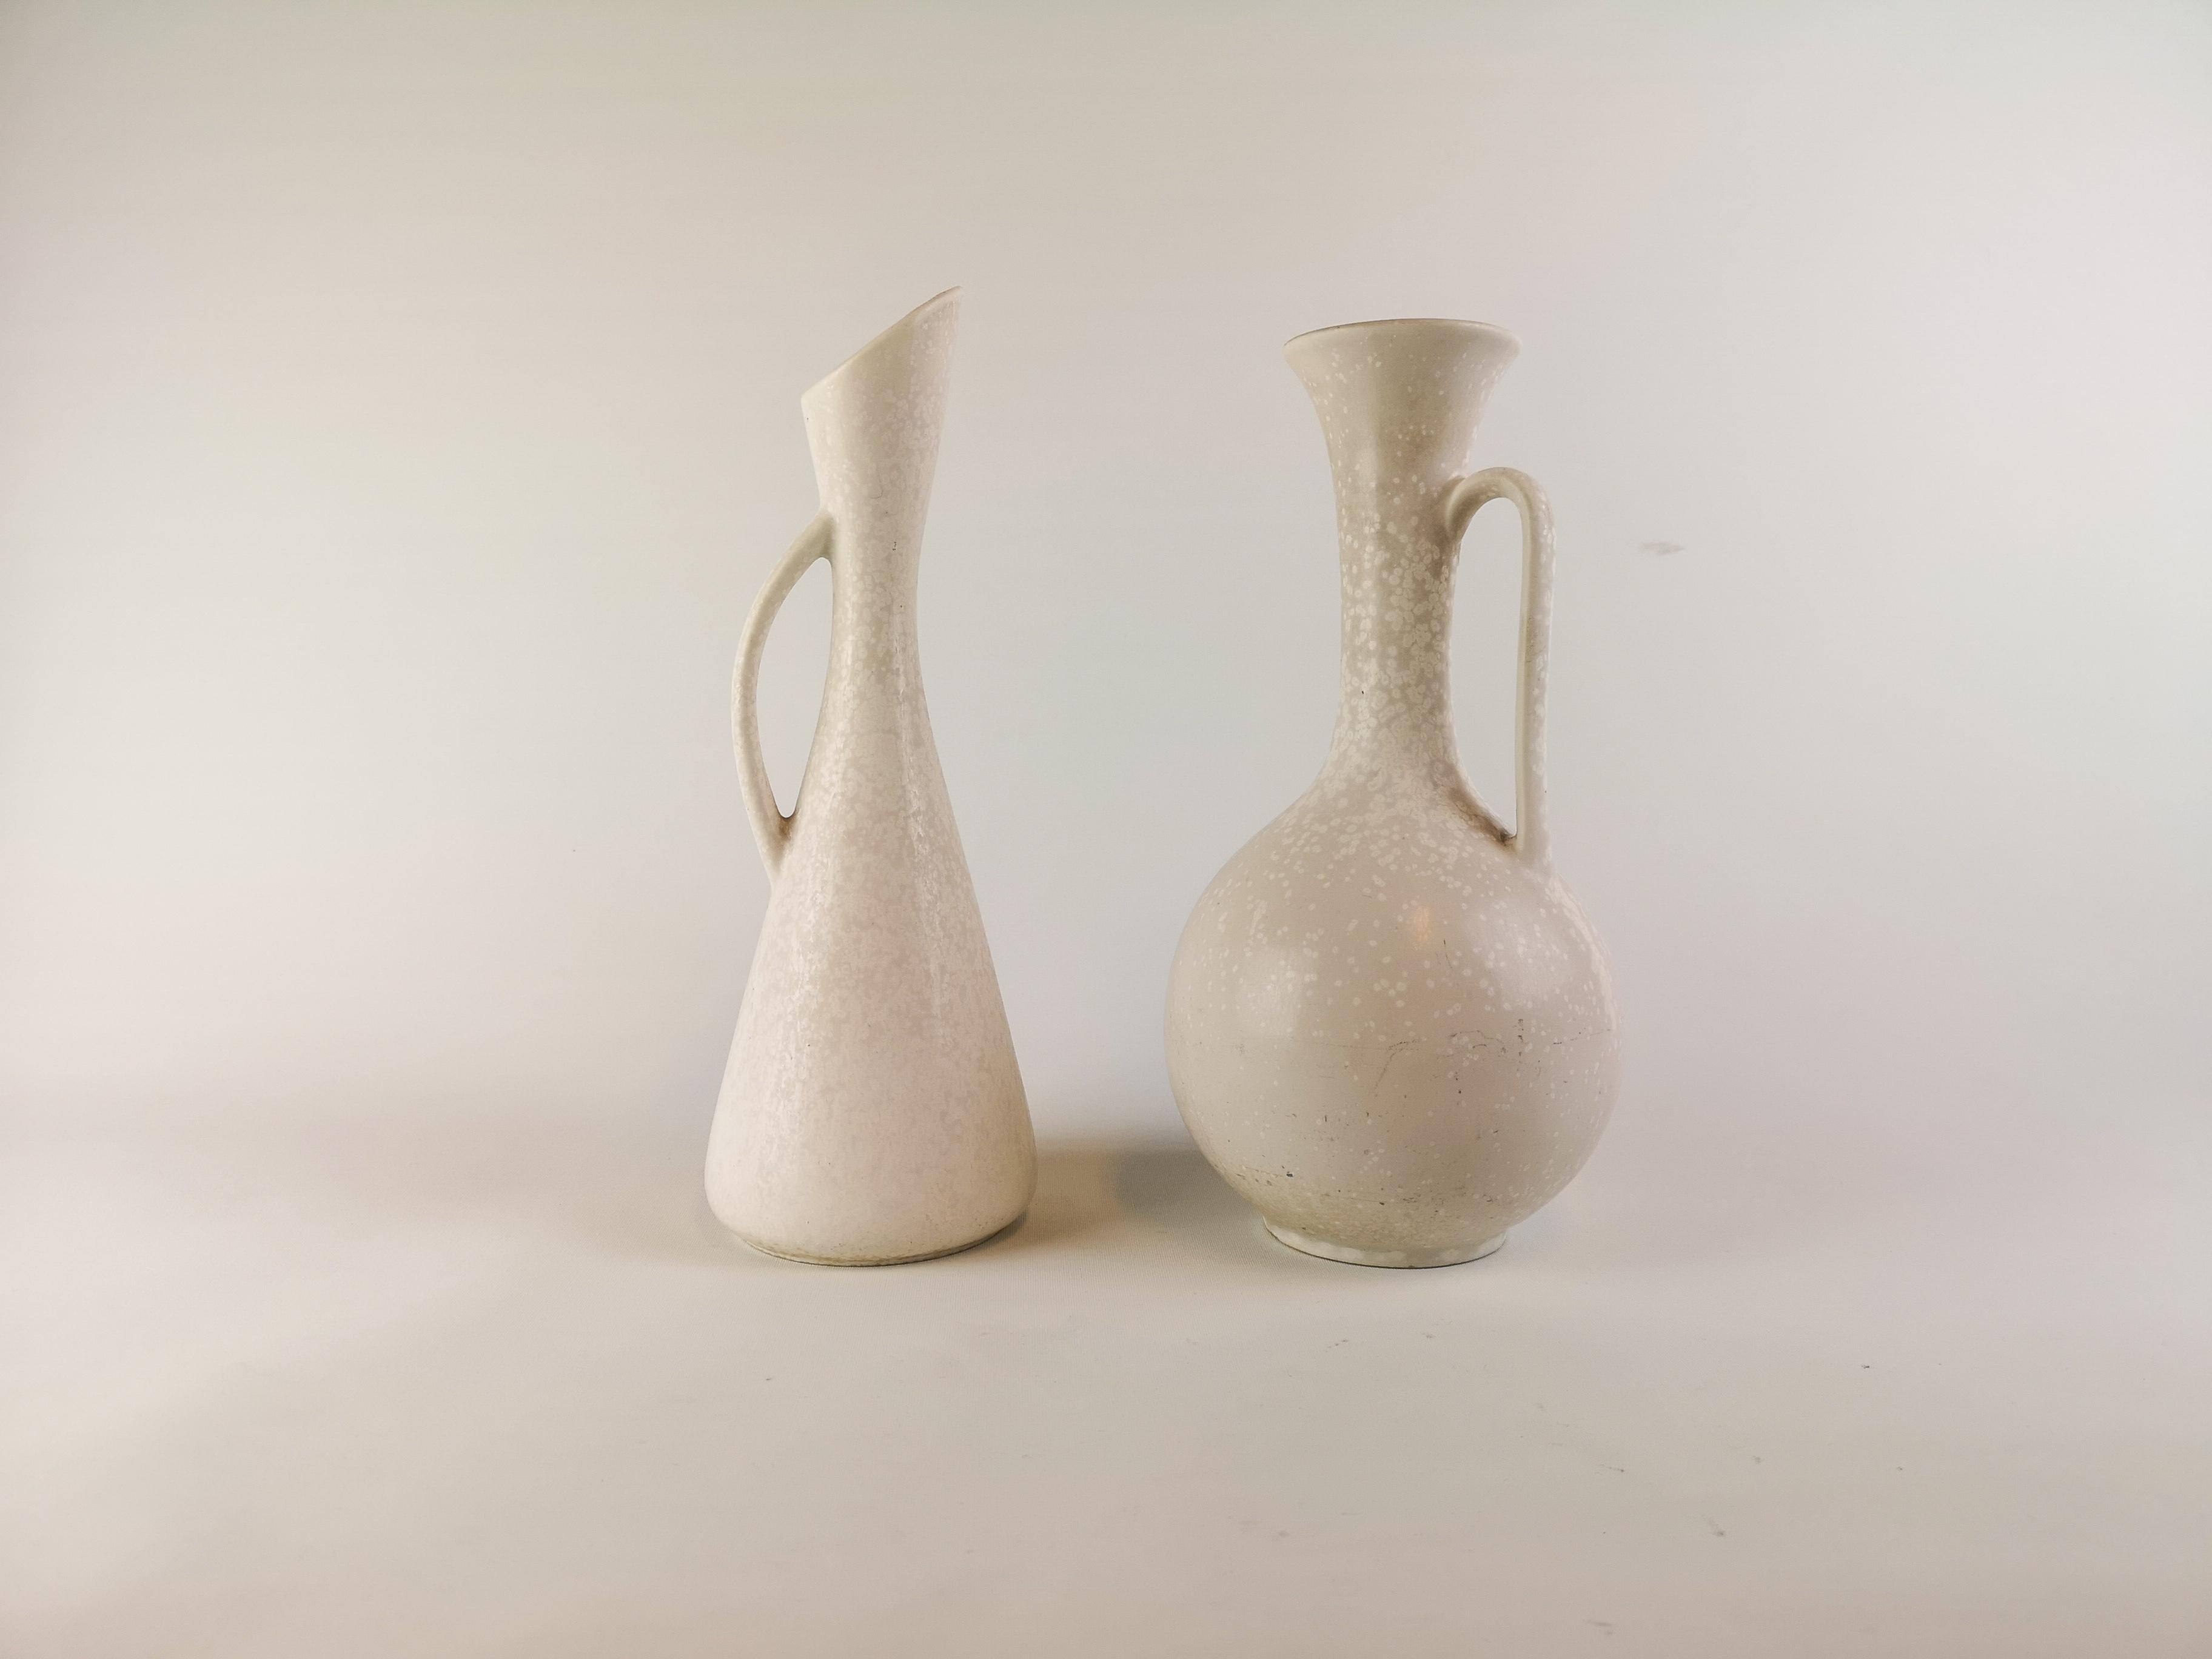 Two wonderful large vases made in Sweden during the 1950s at Rörstrand factory and designed by Gunnar Nylund.

The Vase matches each other with the glaze that goes in white and grey. 

Good condition. 

Measures Vase H 30 x D 11 and H 29 x D